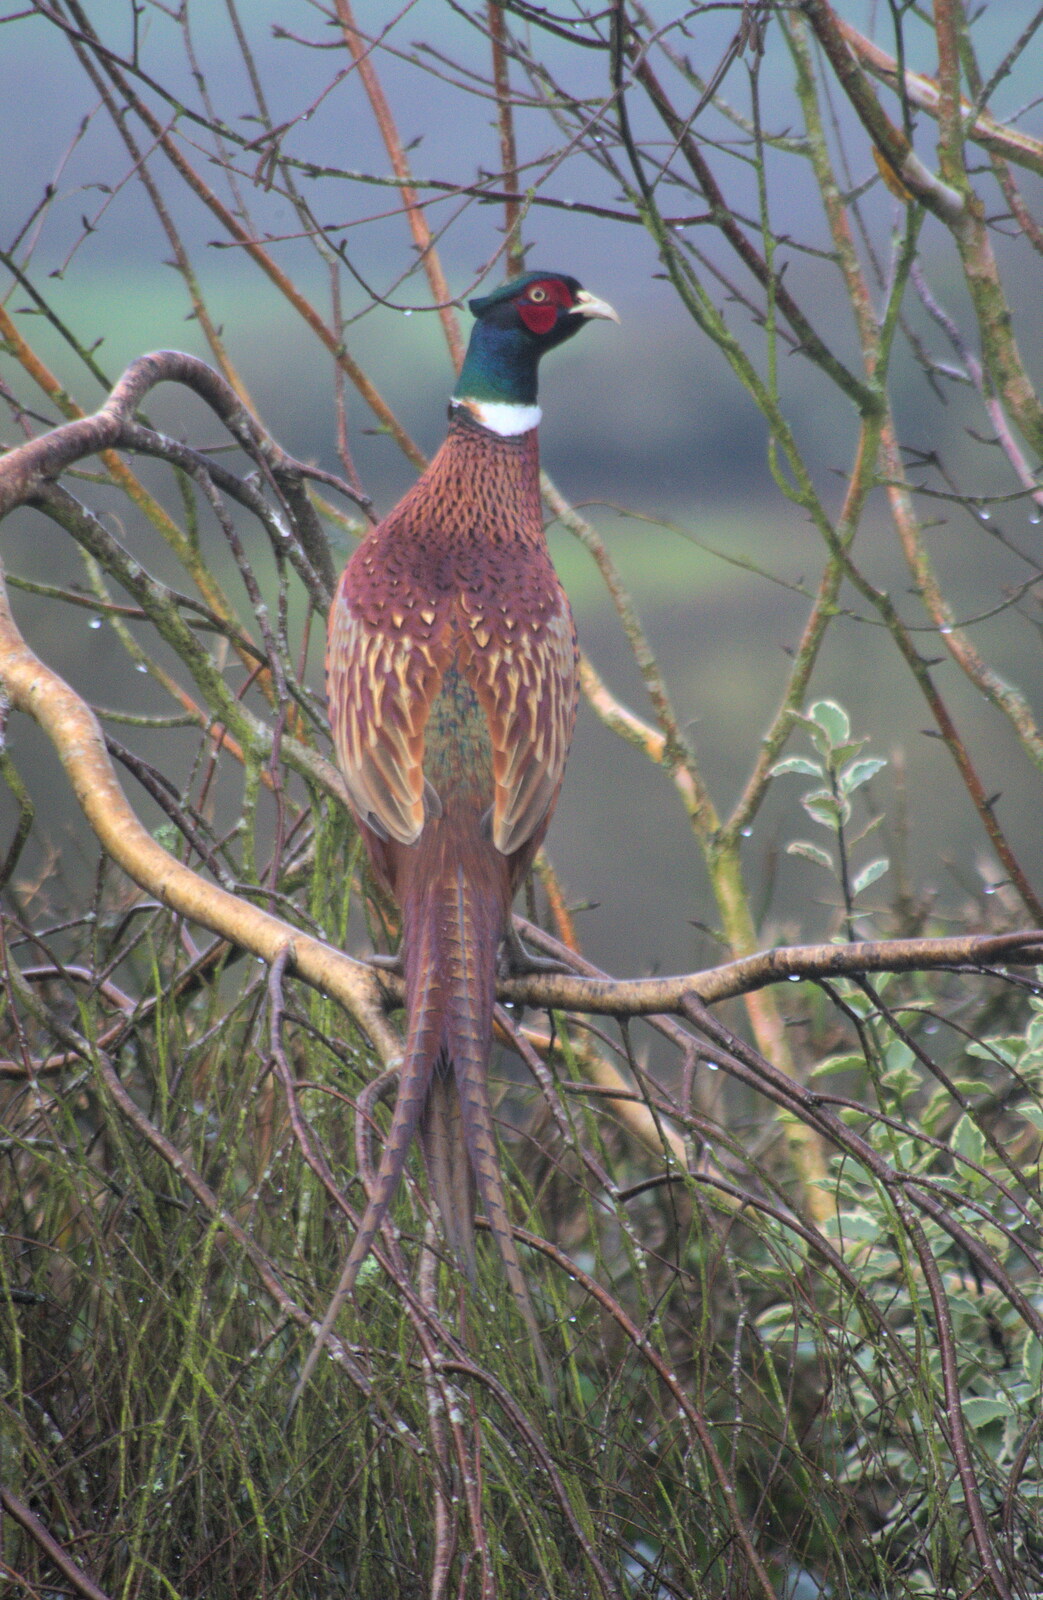 There's a pheasant in Grandma J's tree from New Year's Eve in Spreyton, Devon - 31st December 2017